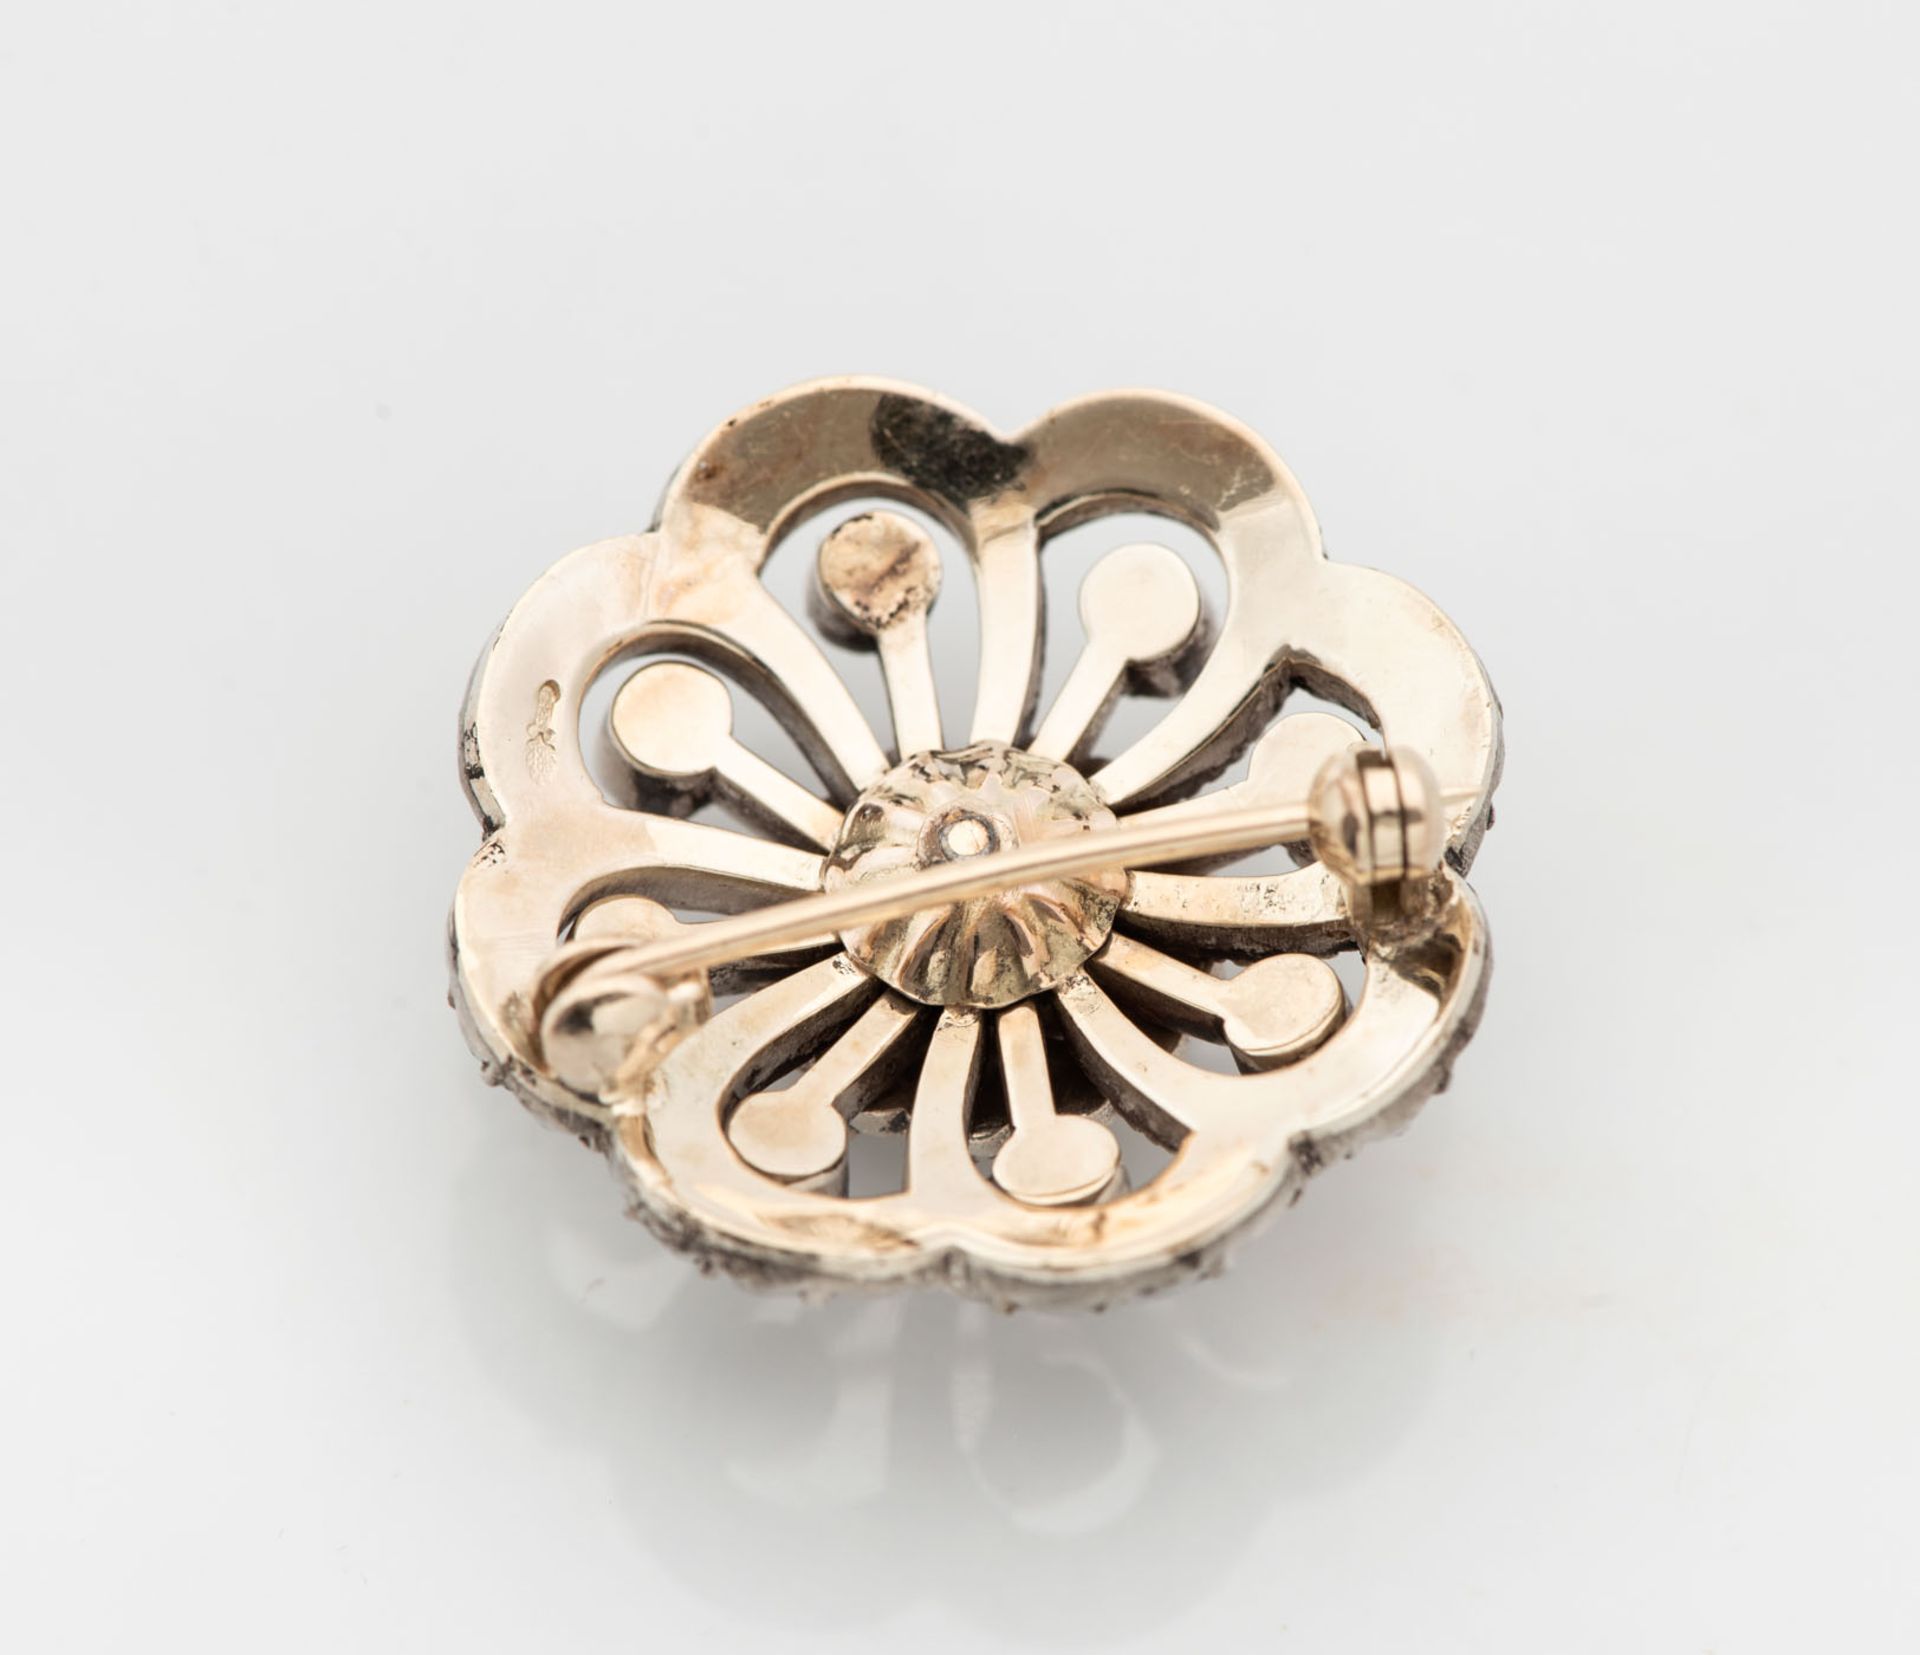 An Attractive 18K Gold and Silver Top Diamond Brooch, 18th Century - Image 2 of 2